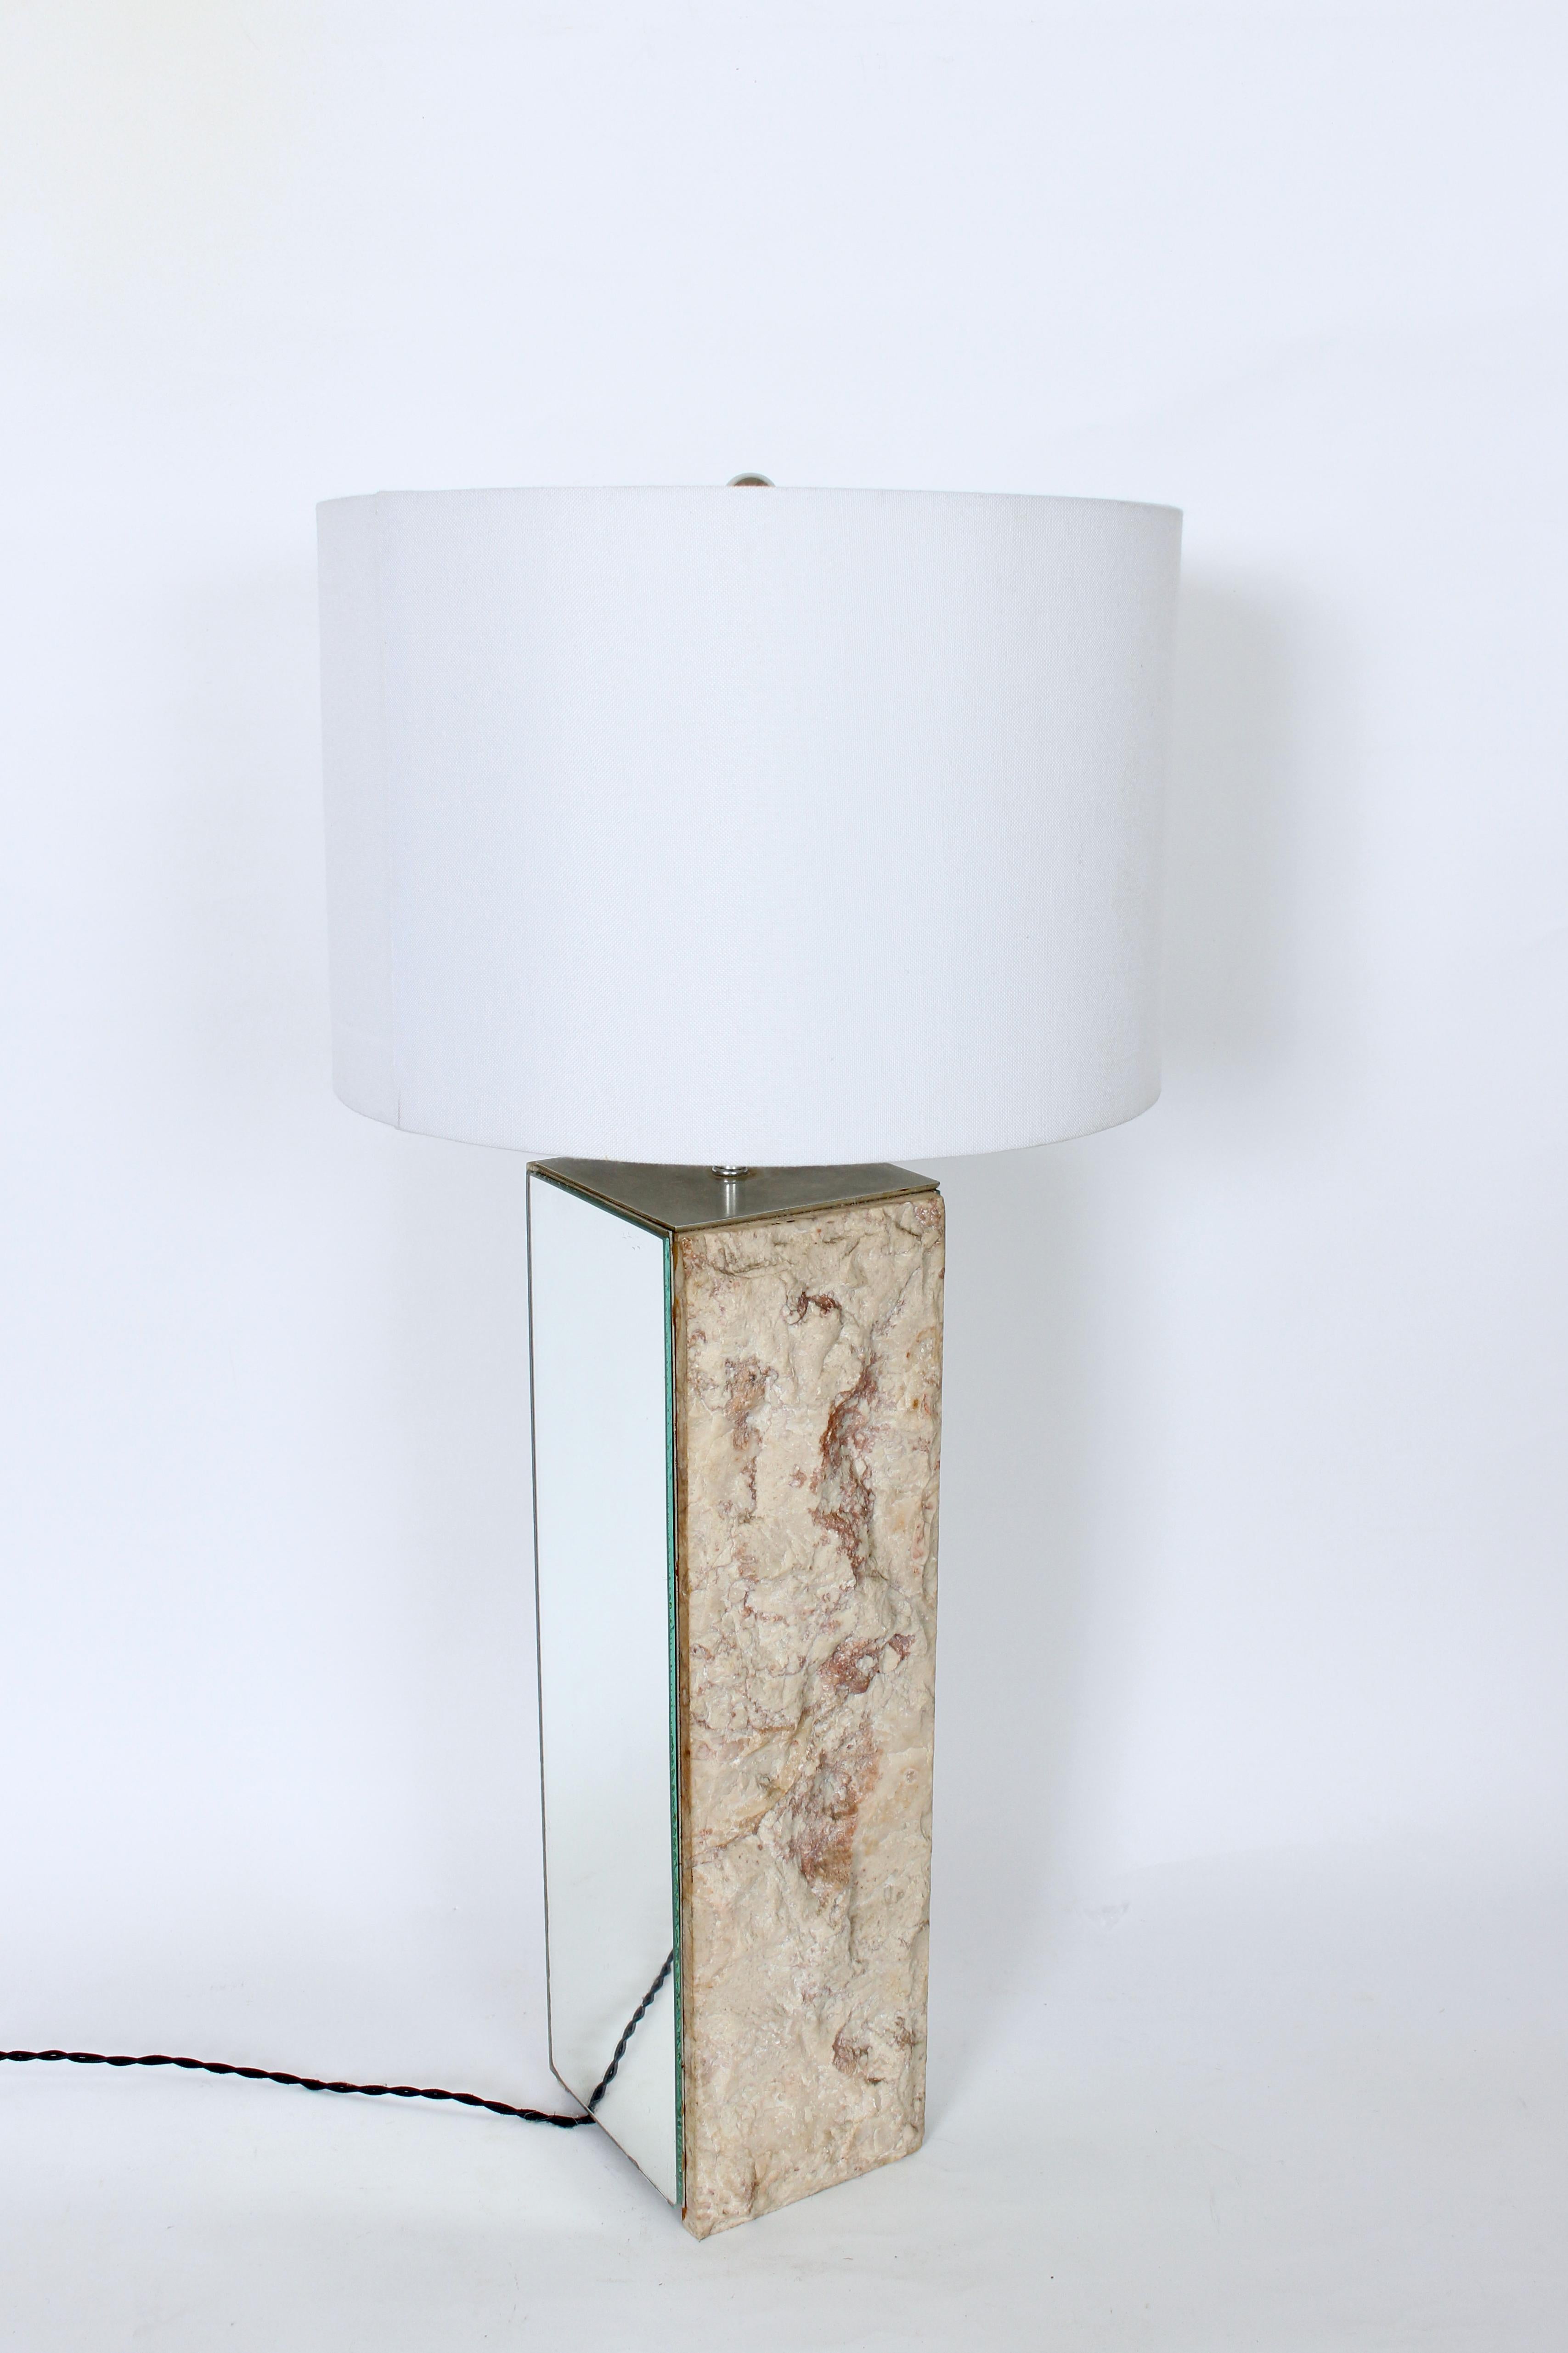 Substantial Laurel Lamp Co. Travertine and Mirror Table Lamp, 1960s In Good Condition For Sale In Bainbridge, NY